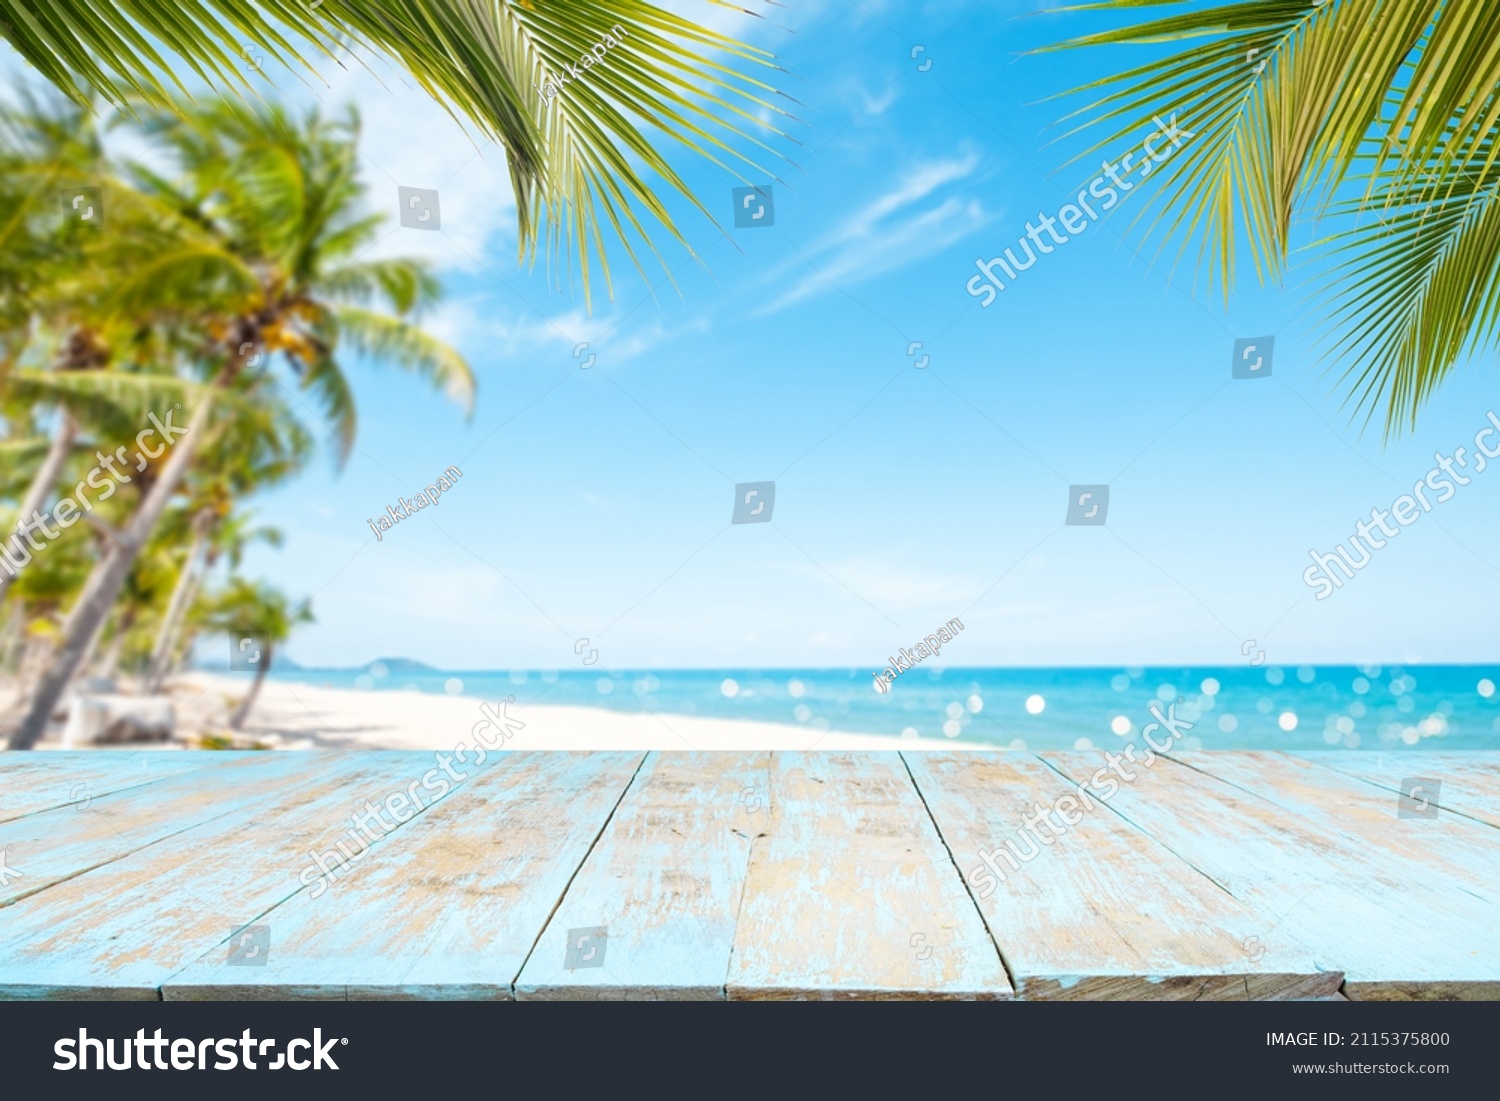 Top of wood table with seascape and palm tree, blur bokeh light of calm sea and sky at tropical beach background. Empty ready for your product display montage. summer vacation background concept. #2115375800